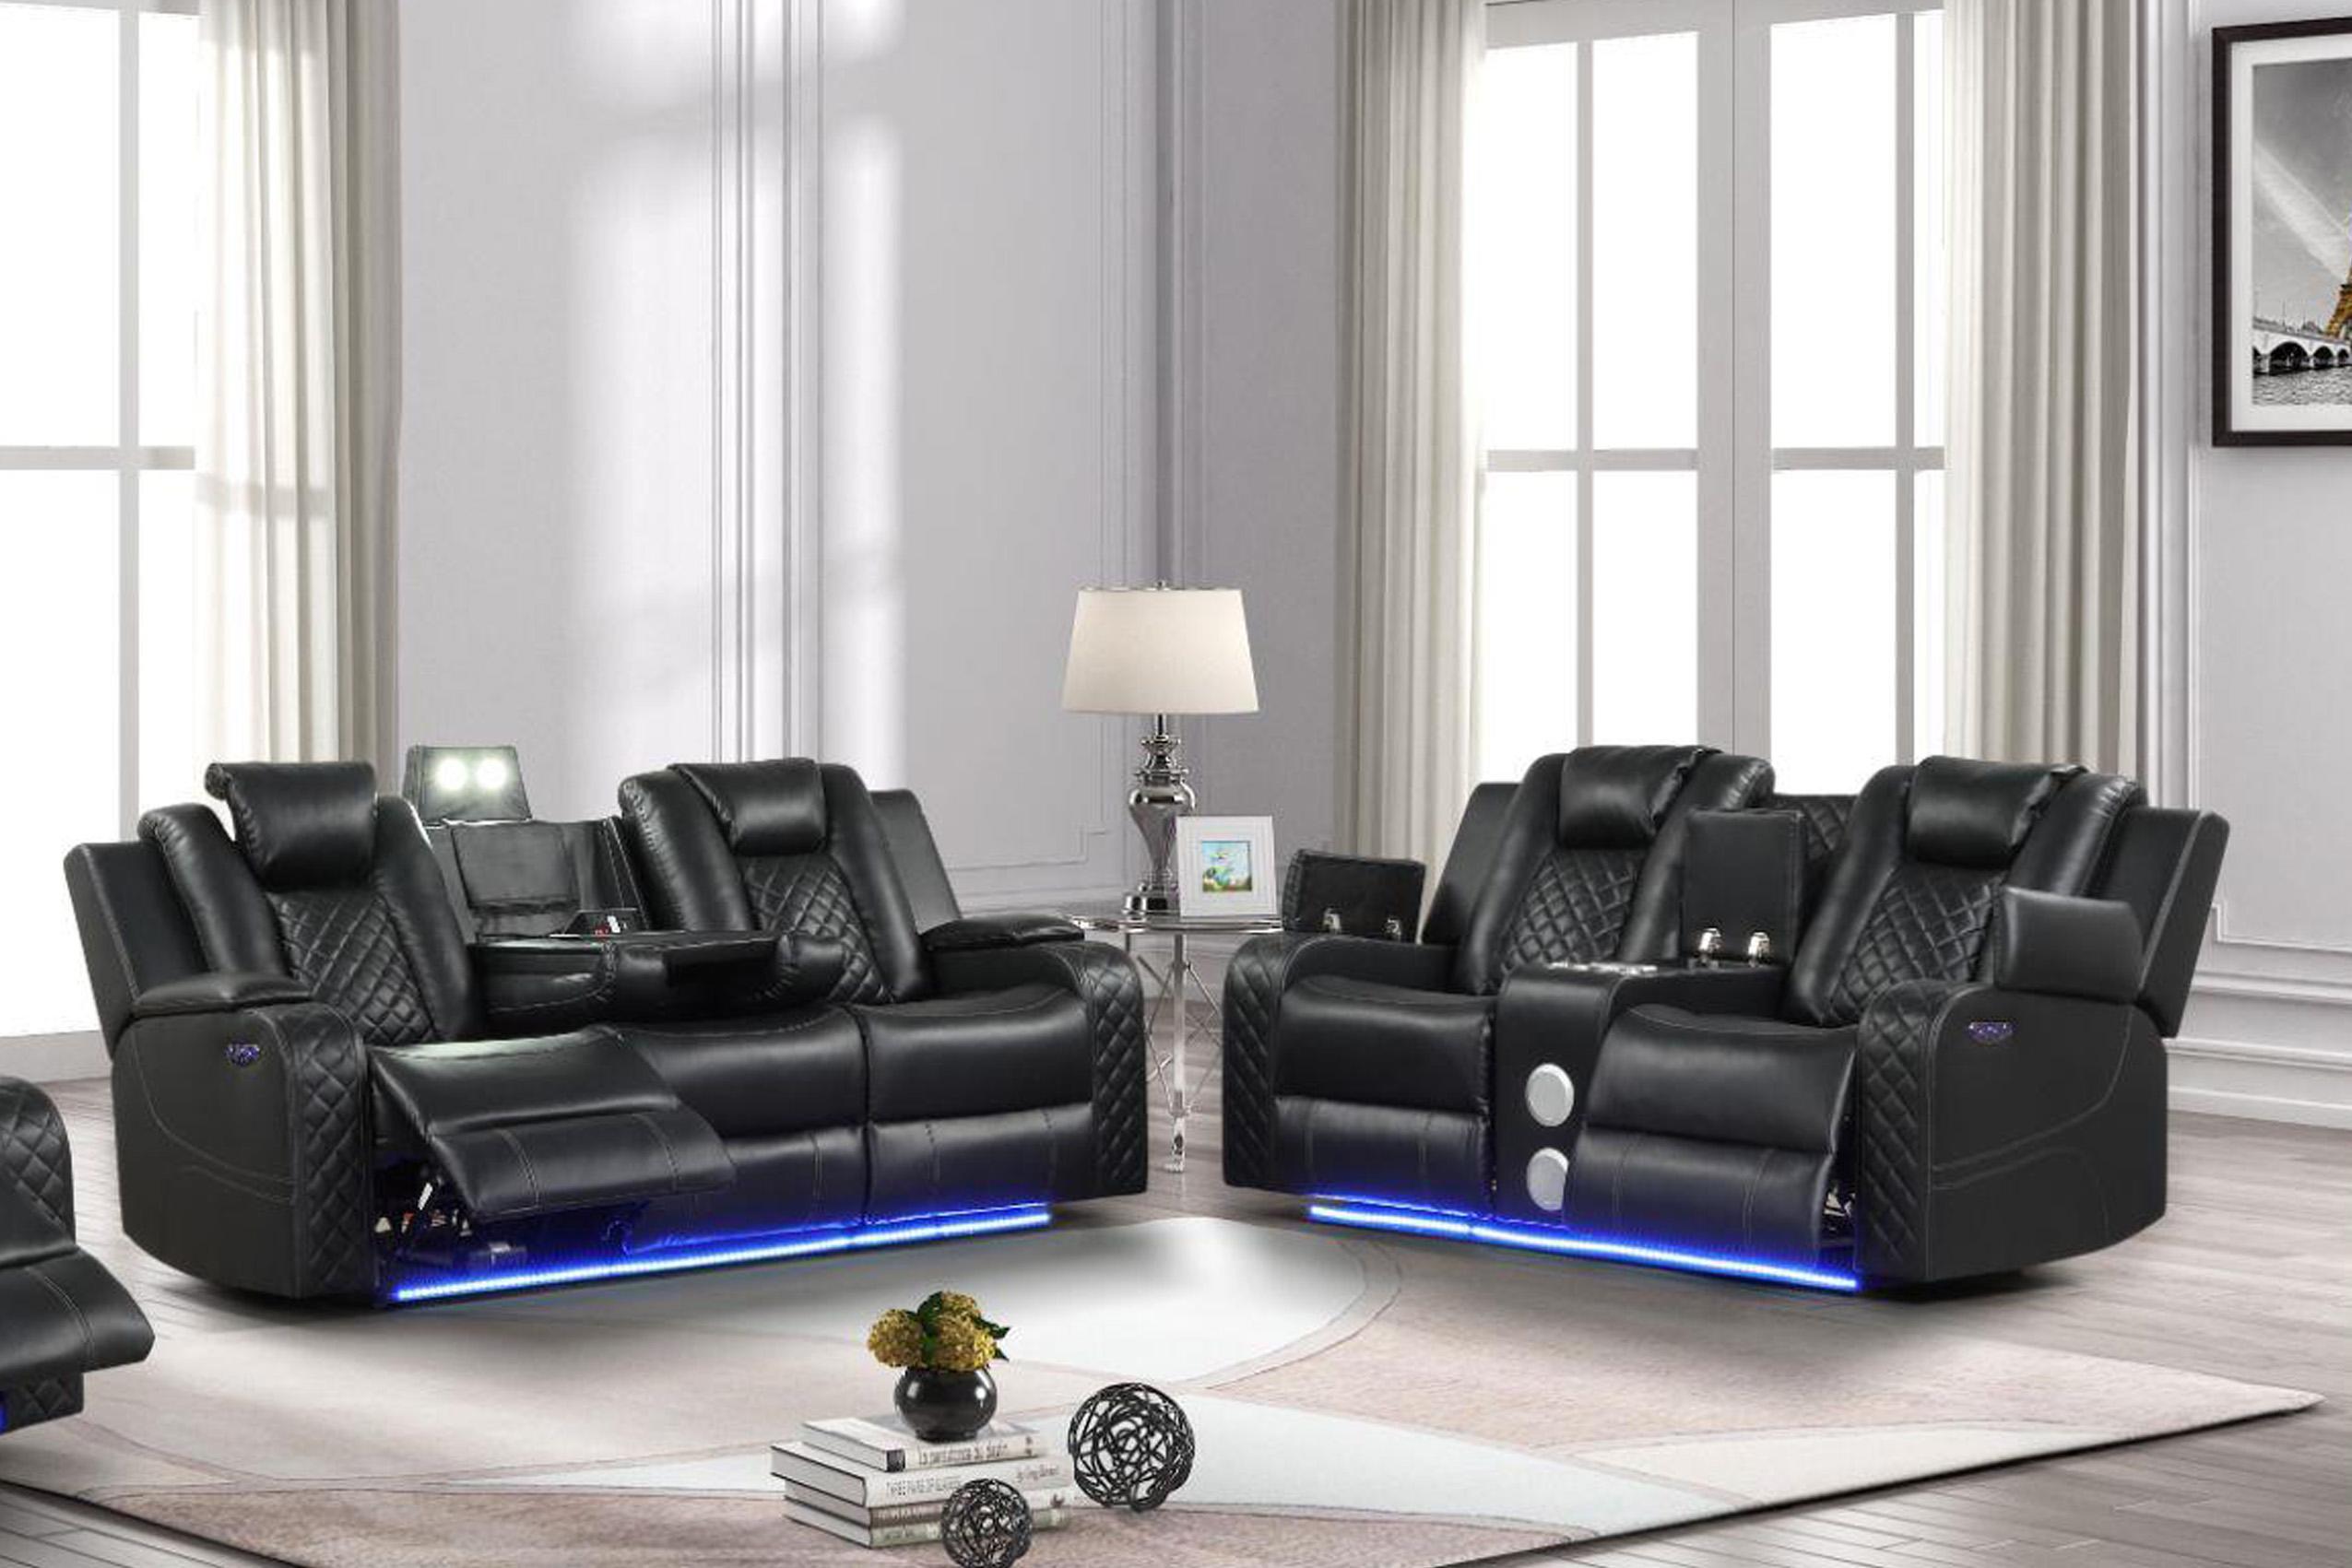 Contemporary, Modern Recliner Sofa Set BENZ Black QB13424839-2PC in Black Faux Leather